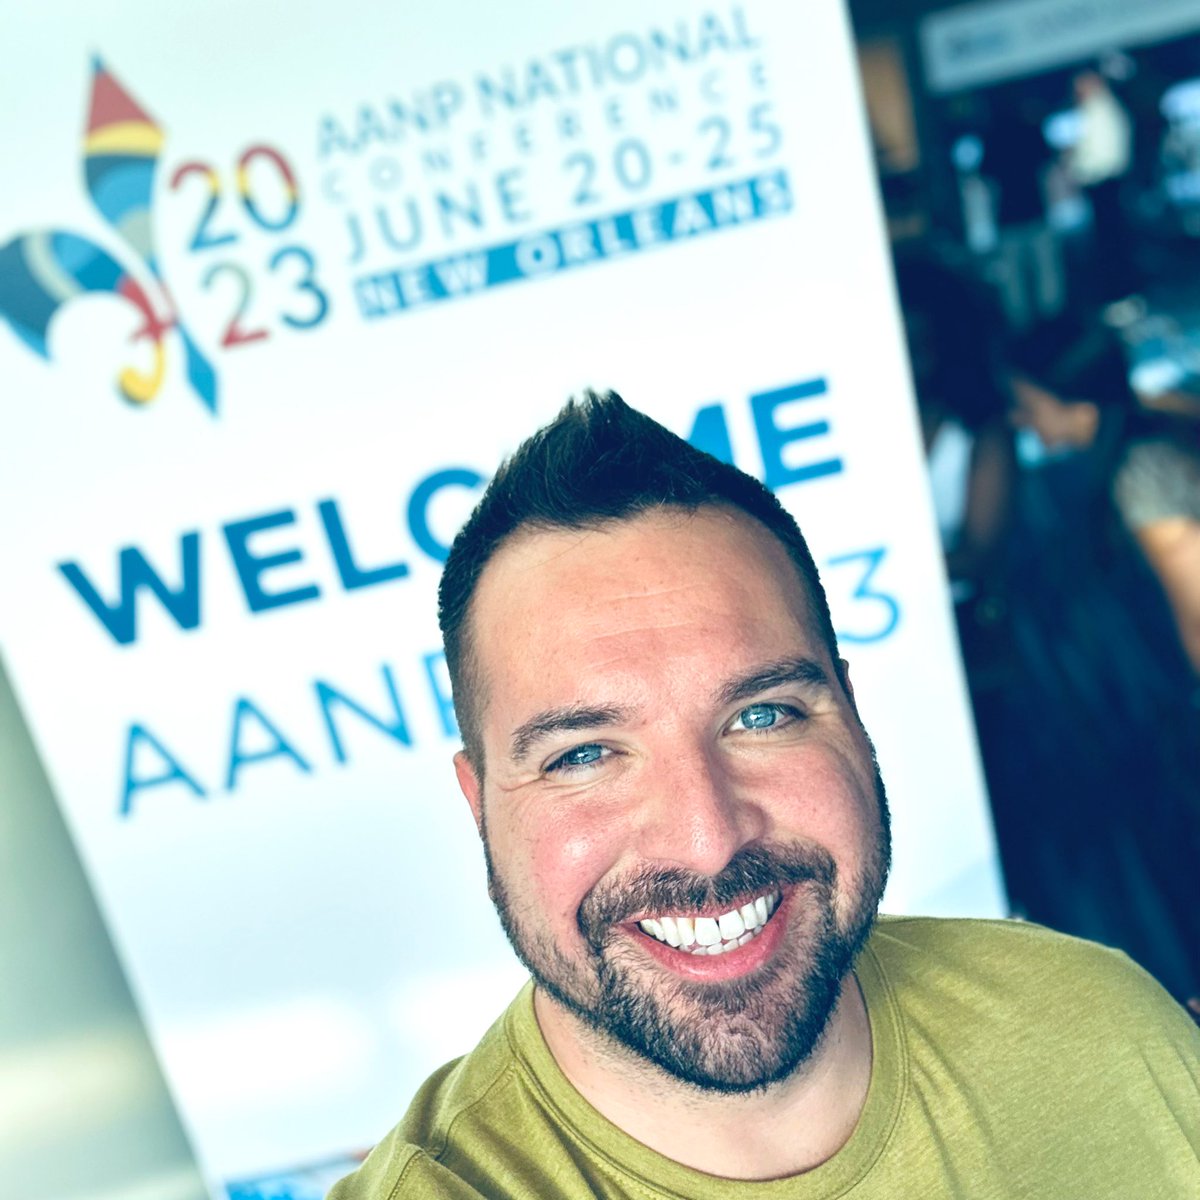 It’s happening! Looking forward to connecting with #NP colleagues from across the nation this week at #AANP23!

#NPsLead @AANP_NEWS